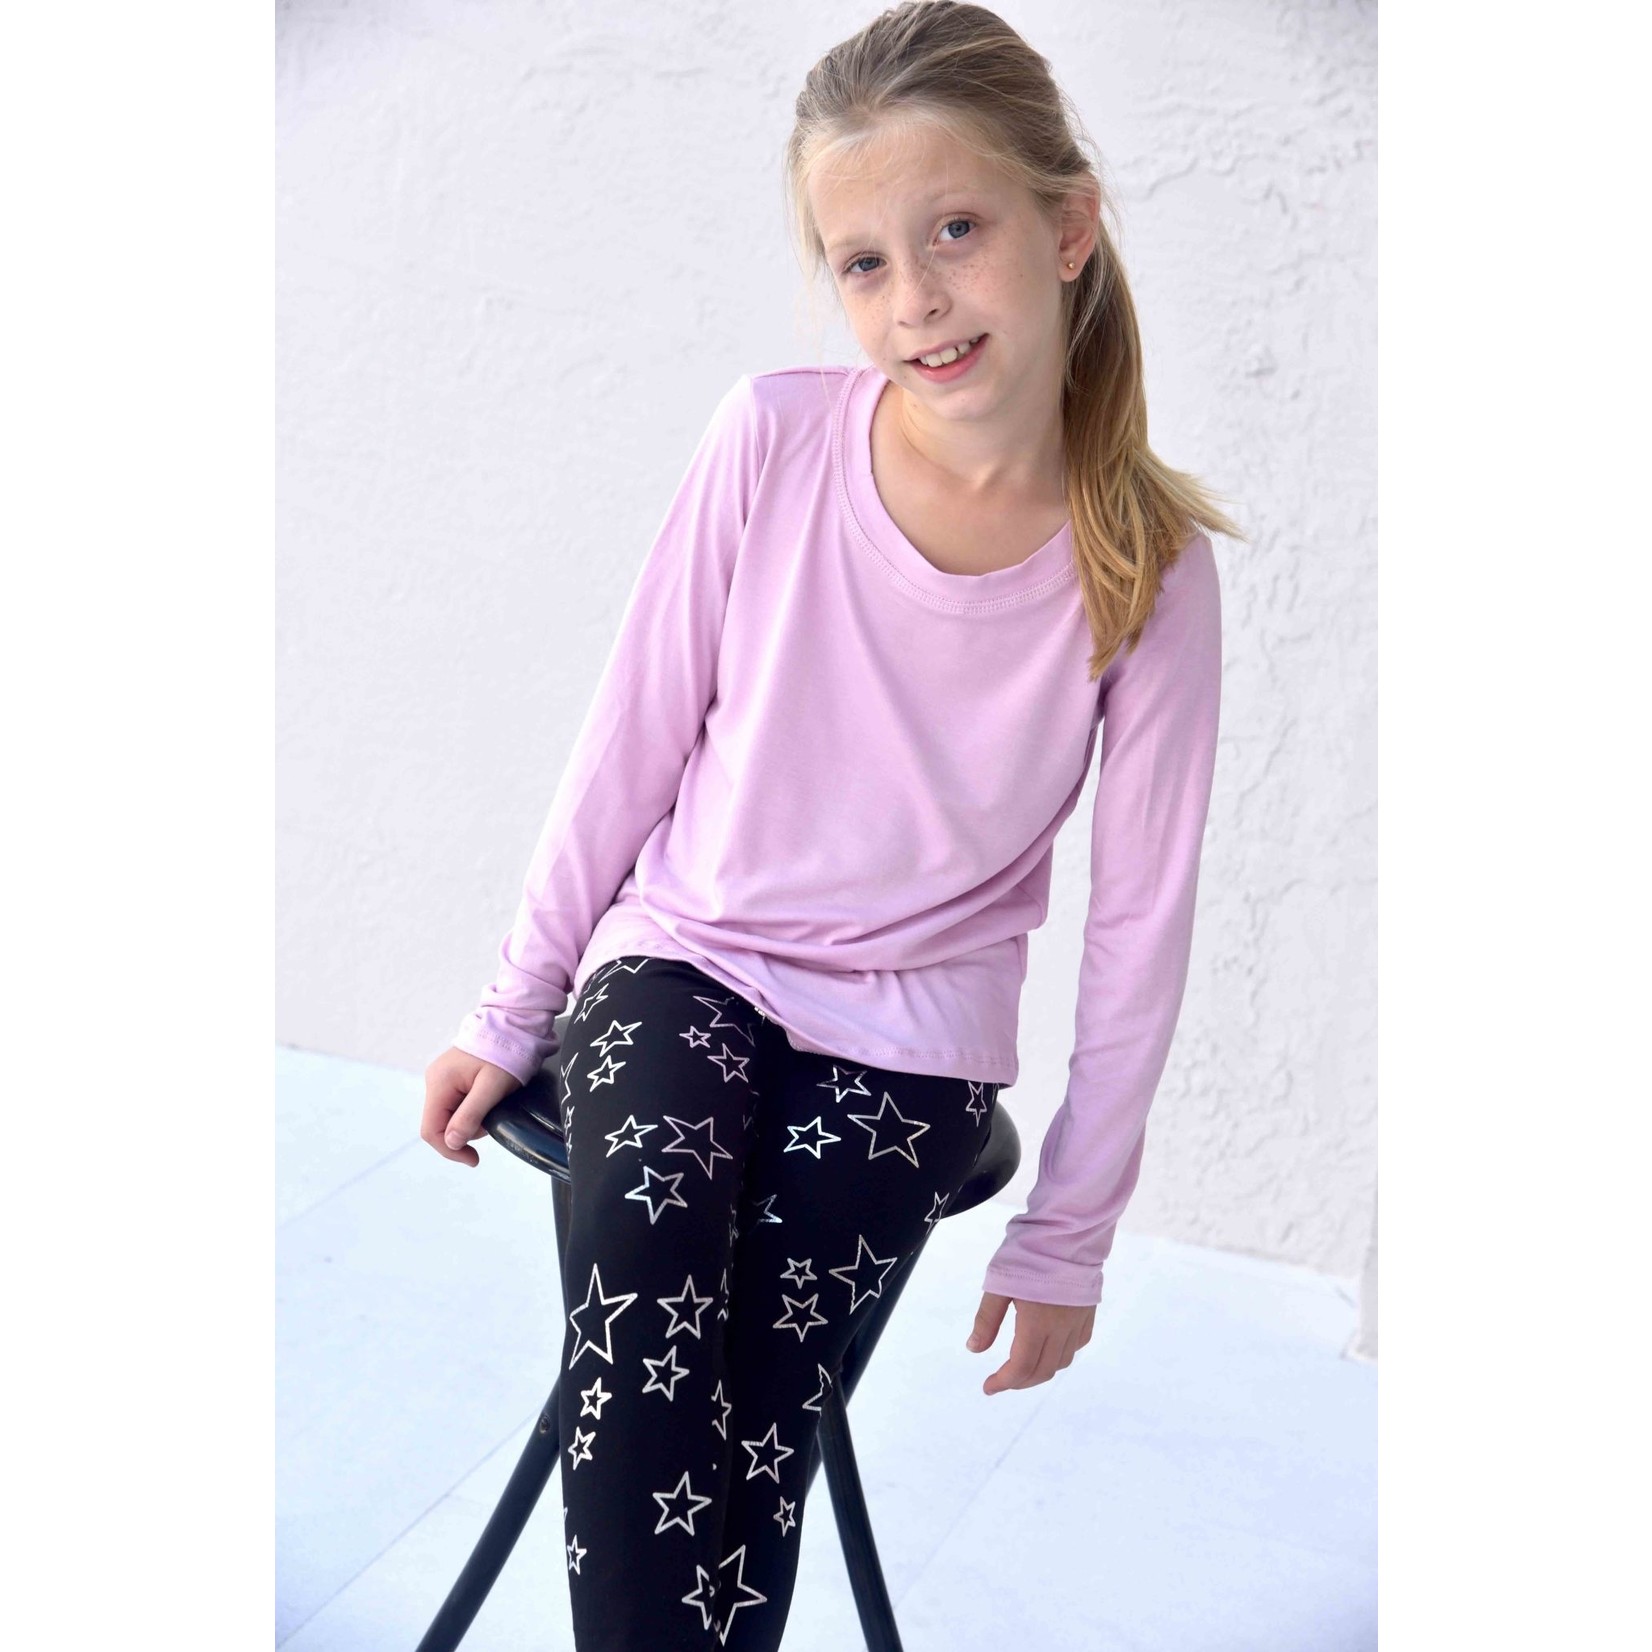 Area Code 407 Pink Lavender Athletic Top